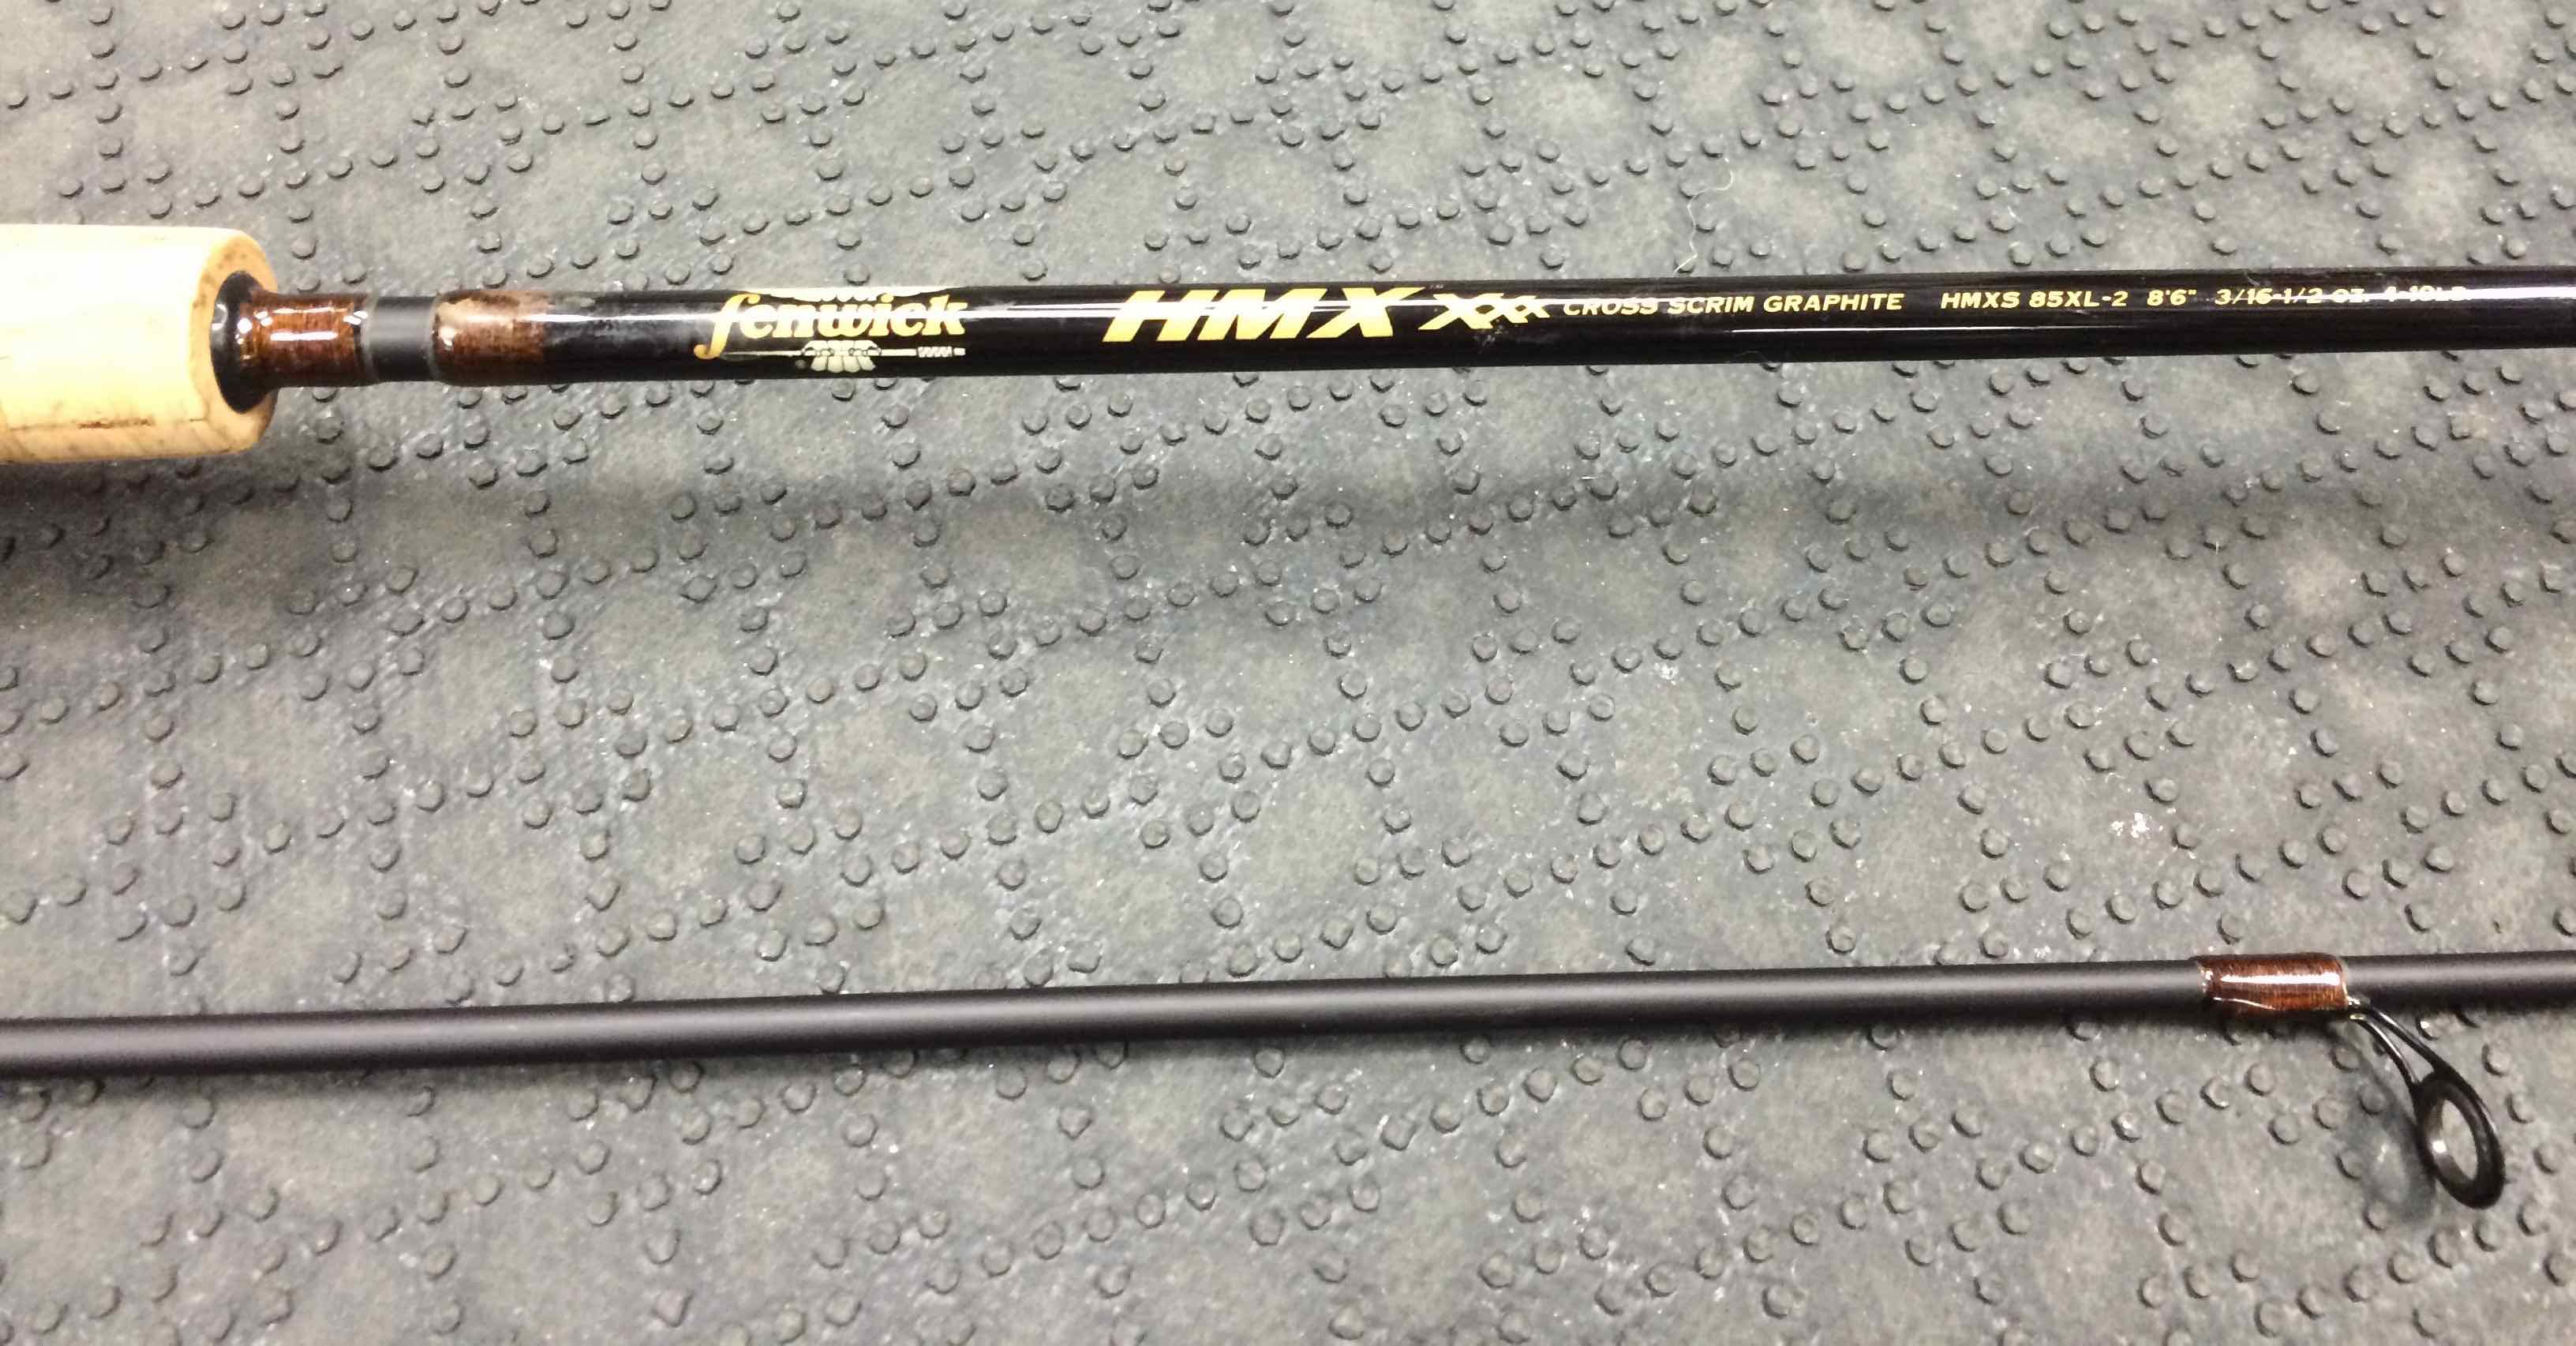 SOLD – NEWER PRICE! – Fenwick HMX – 2 Piece 8'6″ Spinning Rod – $30 – HMXS  85XL-2 – The First Cast – Hook, Line and Sinker's Fly Fishing Shop